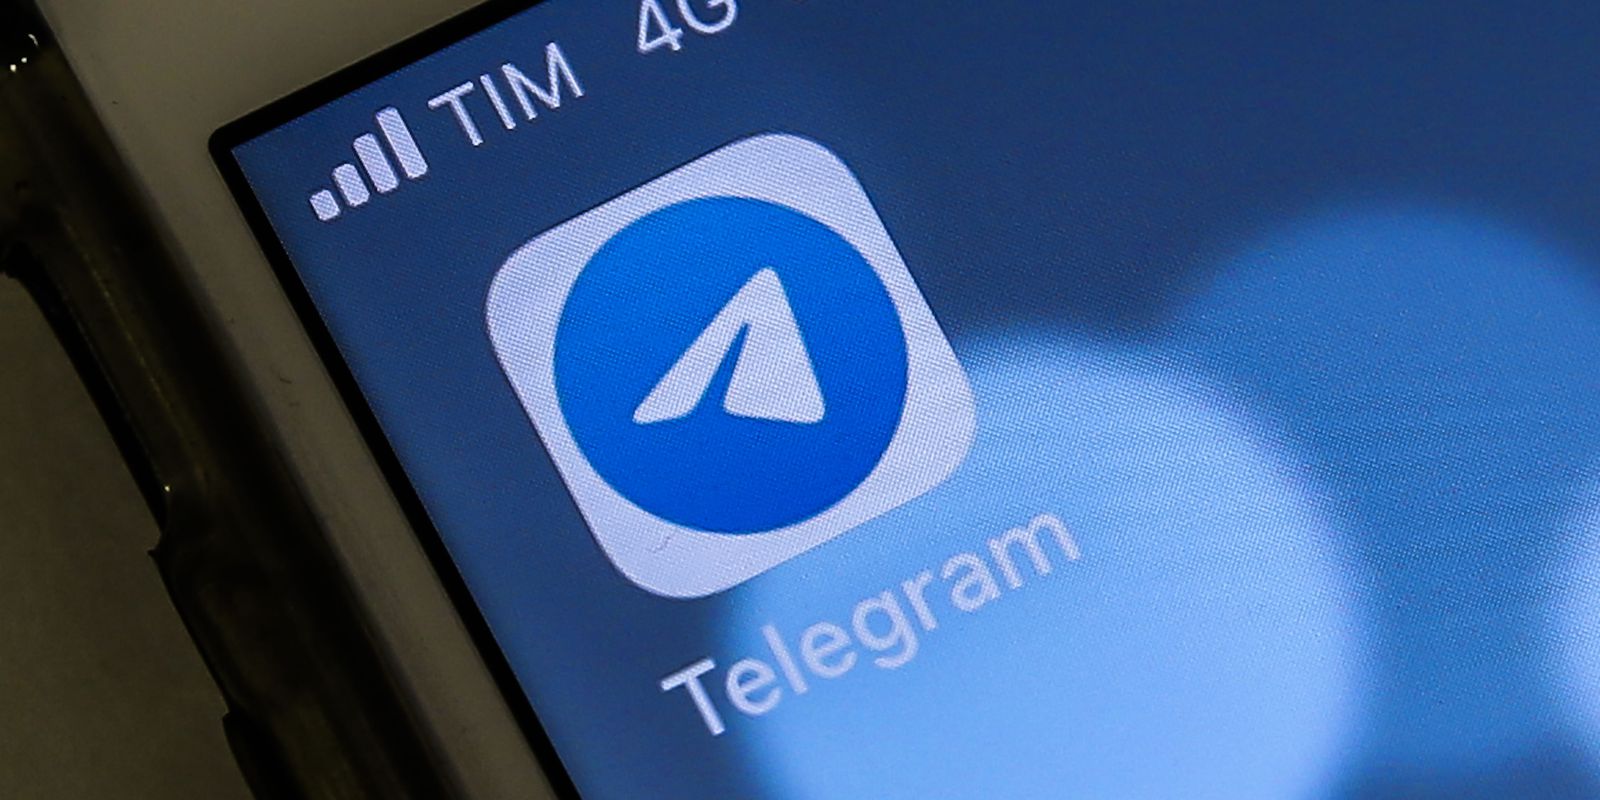 STF gives Telegram 24 hours to comply with determinations and avoid blocking